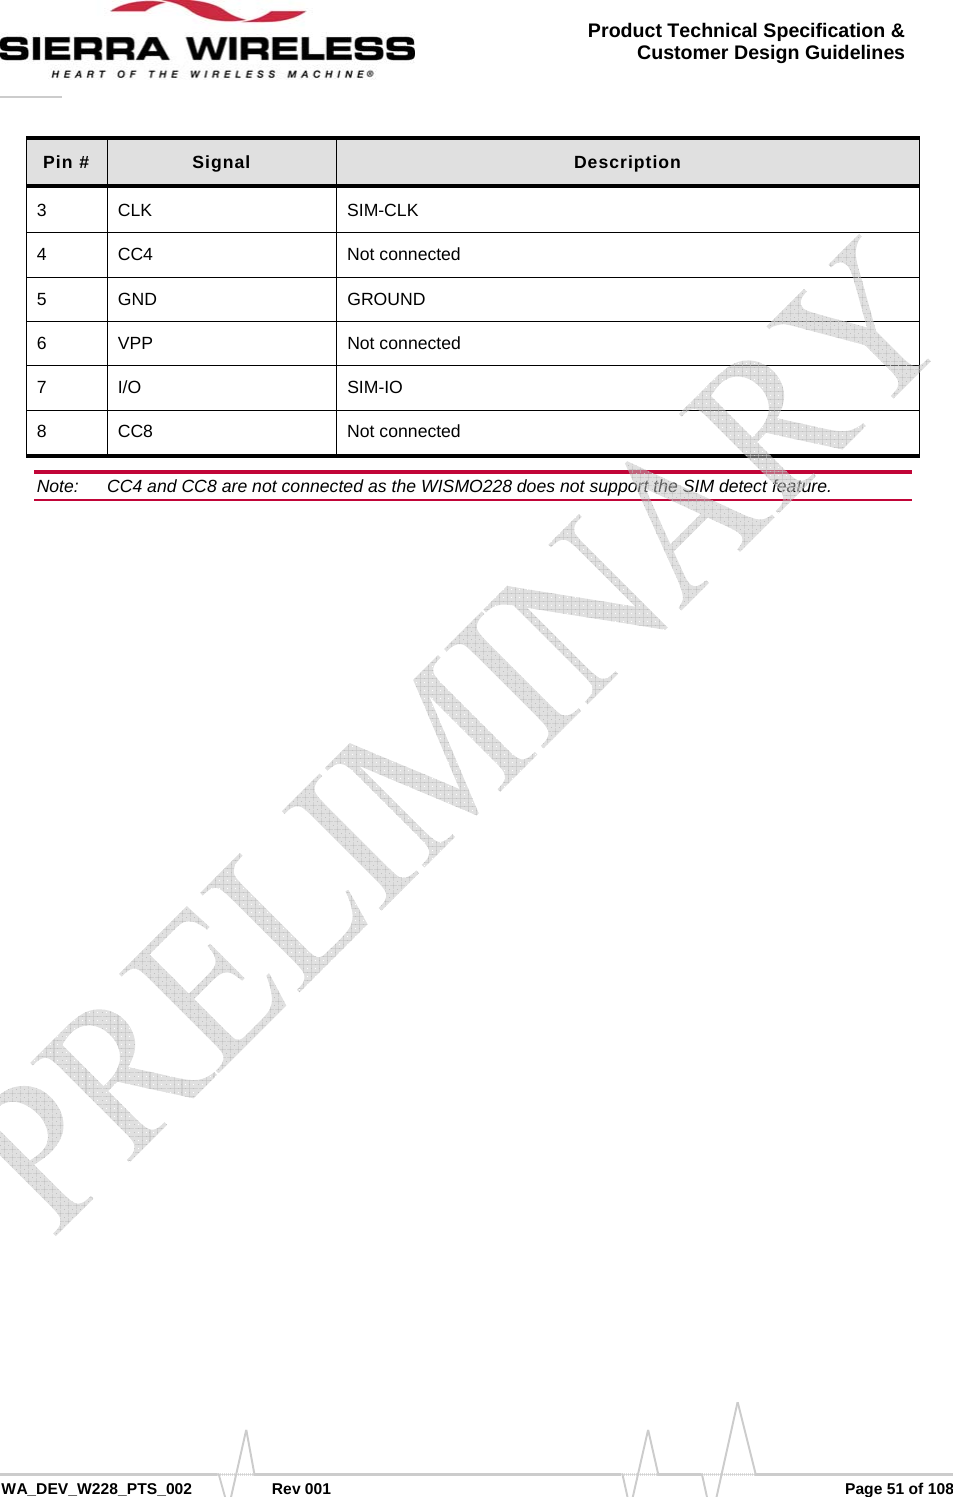      WA_DEV_W228_PTS_002 Rev 001  Page 51 of 108 Product Technical Specification &amp; Customer Design Guidelines Pin #  Signal  Description 3 CLK  SIM-CLK 4 CC4  Not connected 5 GND  GROUND 6 VPP  Not connected 7 I/O  SIM-IO 8 CC8  Not connected Note:   CC4 and CC8 are not connected as the WISMO228 does not support the SIM detect feature.     